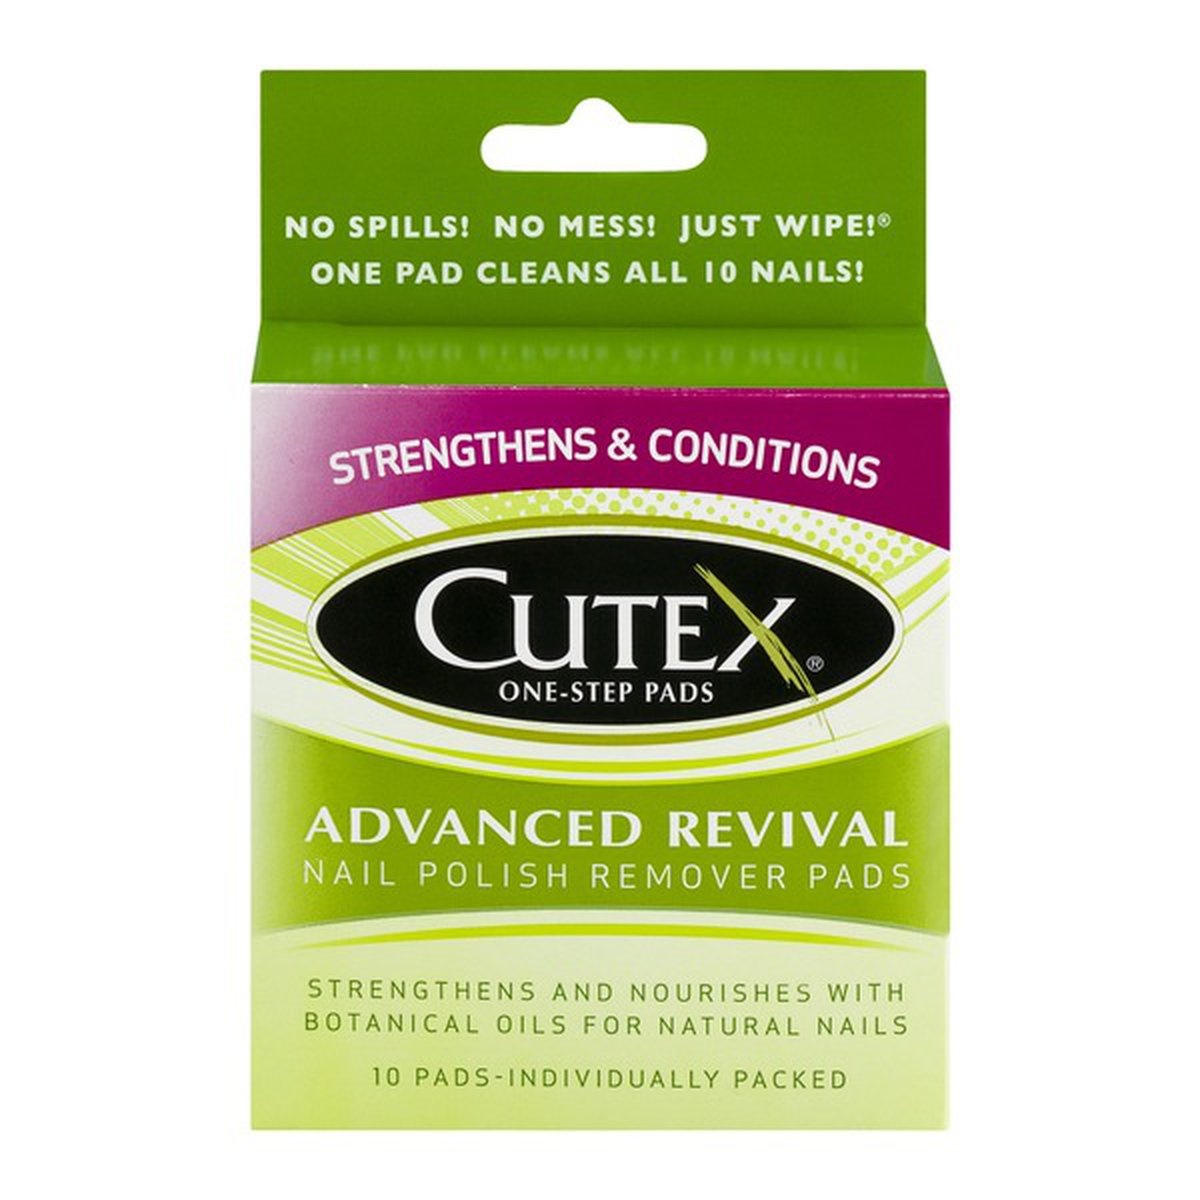 Cutex One-Step Pads Advanced Revival Nail Polish Remover Pads - 10 Ct 10 ct  | Shipt